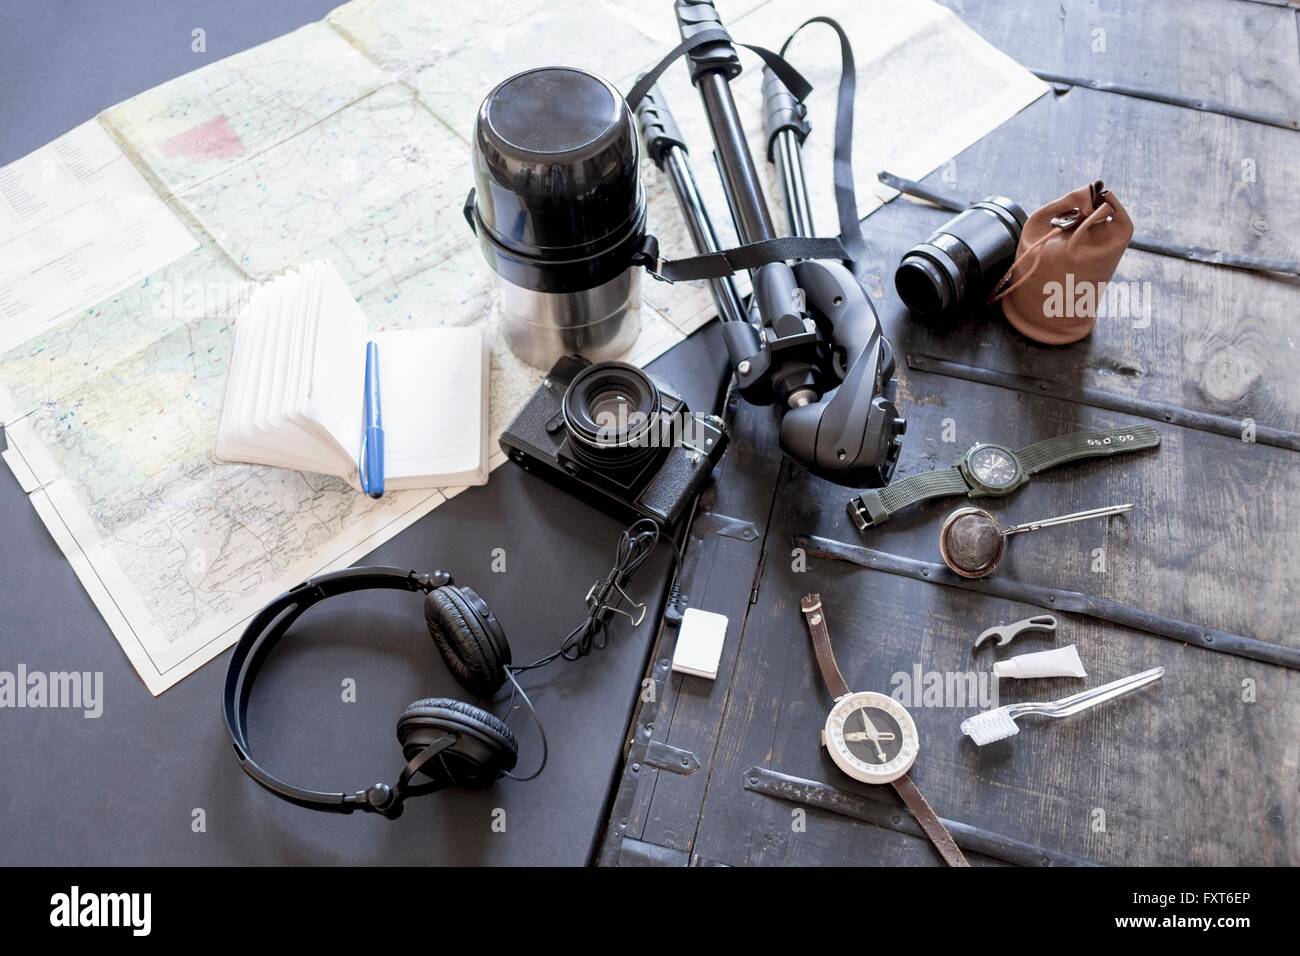 Overhead view of camera, accessories, map and notebook Stock Photo